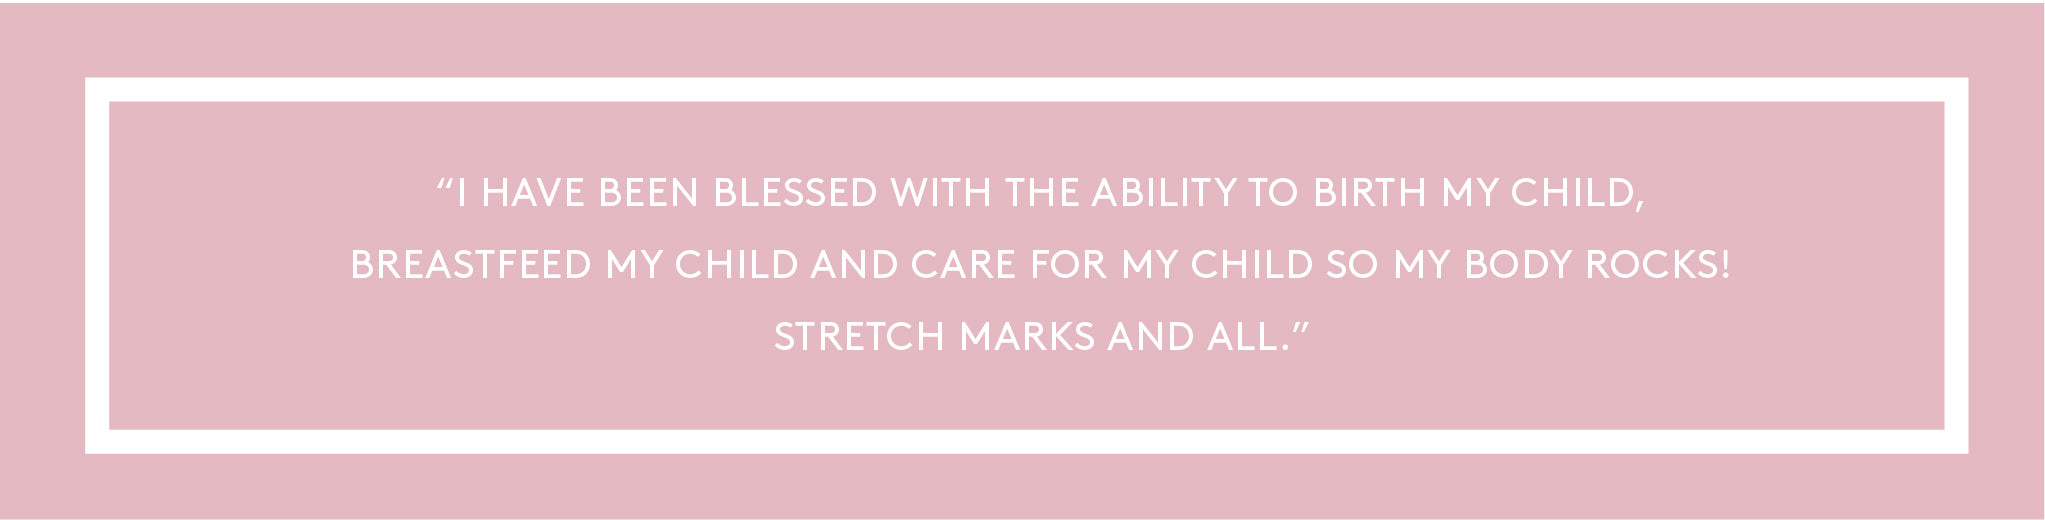 ''I have been blessed with the ability to birth my child, breastfeed my child and care for my child so my body rocks! Stretch marks and all.''